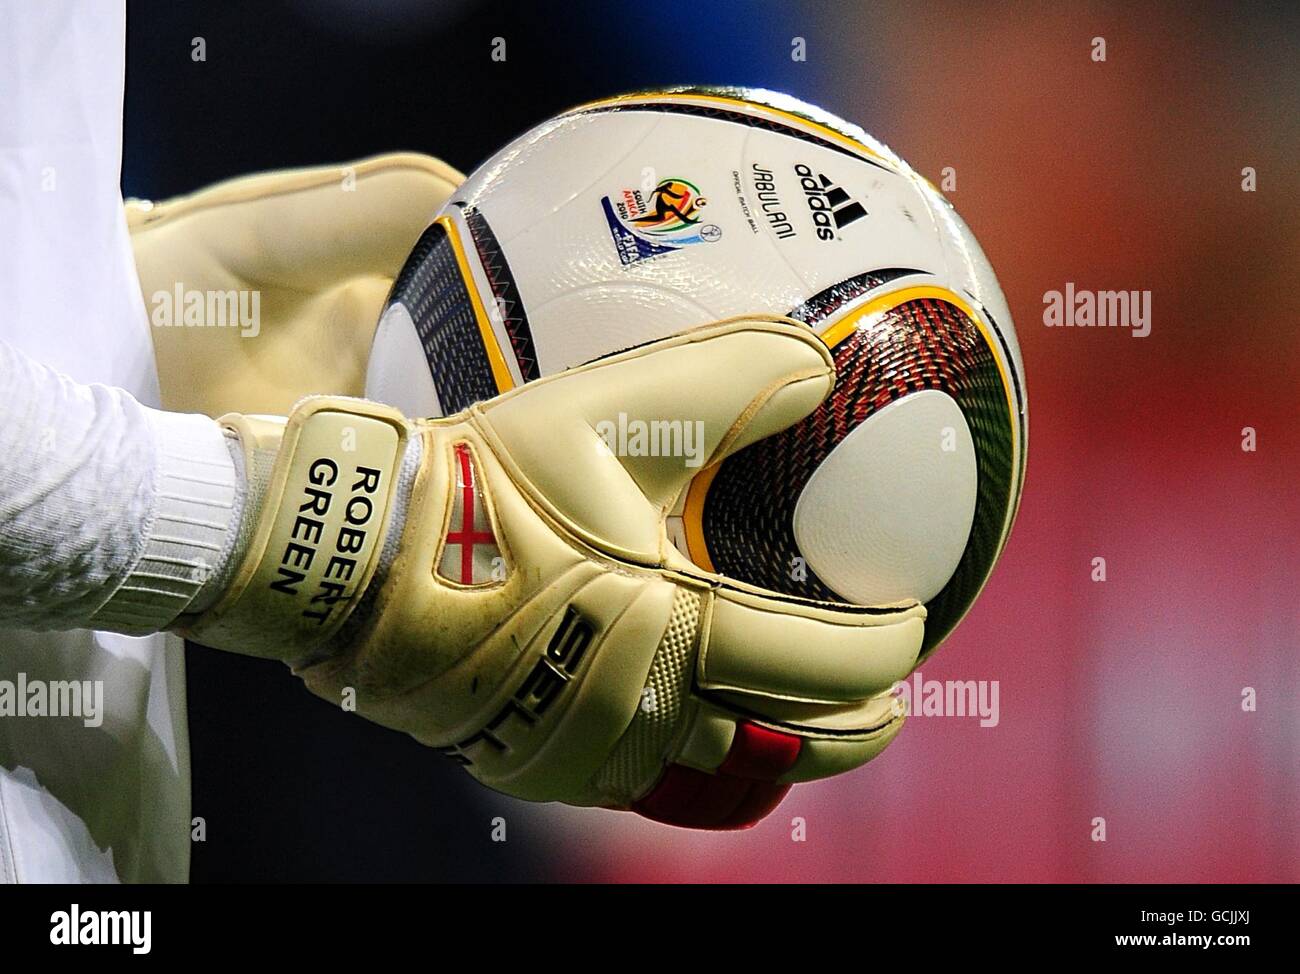 The Adidas Jabulani World Cup match ball in the hands of England goalkeeper  Robert Green prior to kick off Stock Photo - Alamy